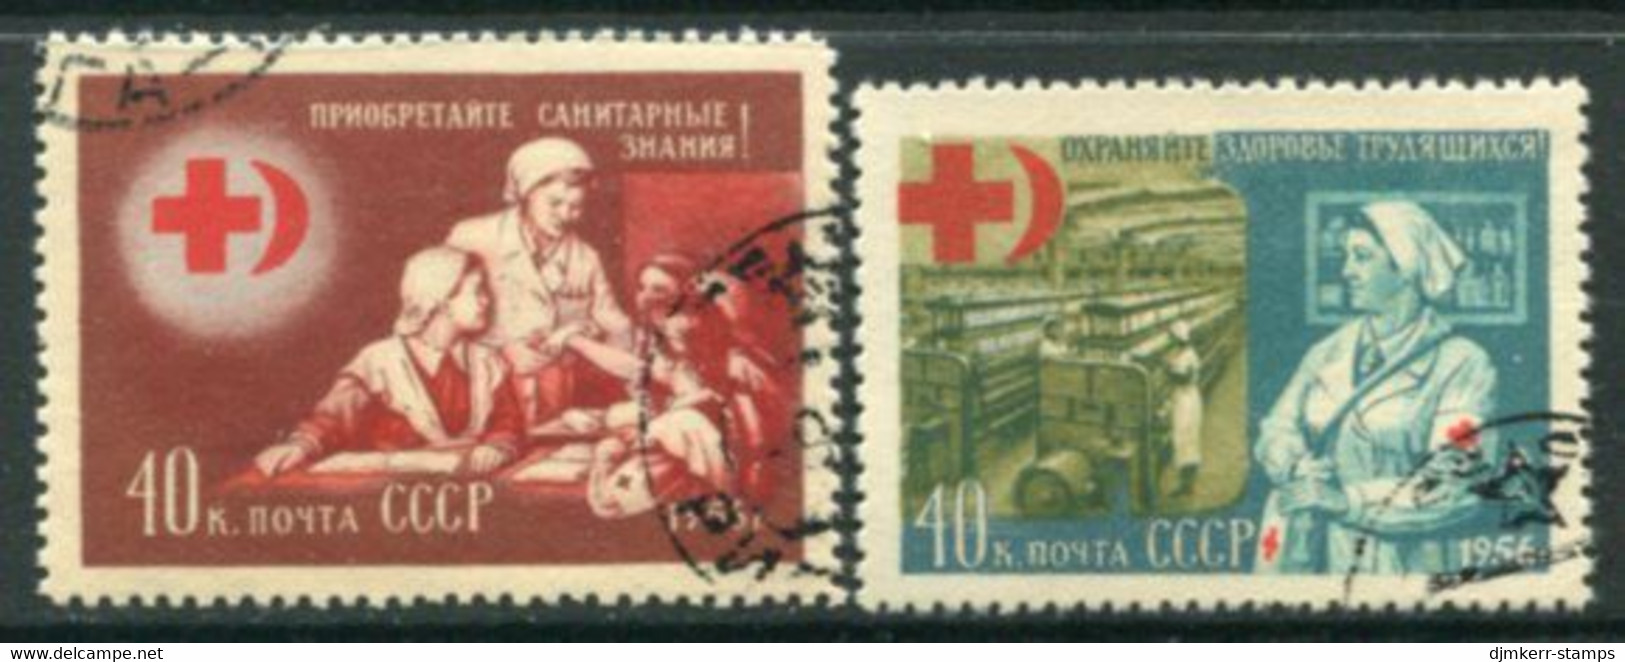 SOVIET UNION 1956 Red Cross / Red Crescent Used.  Michel 1831-32 - Oblitérés